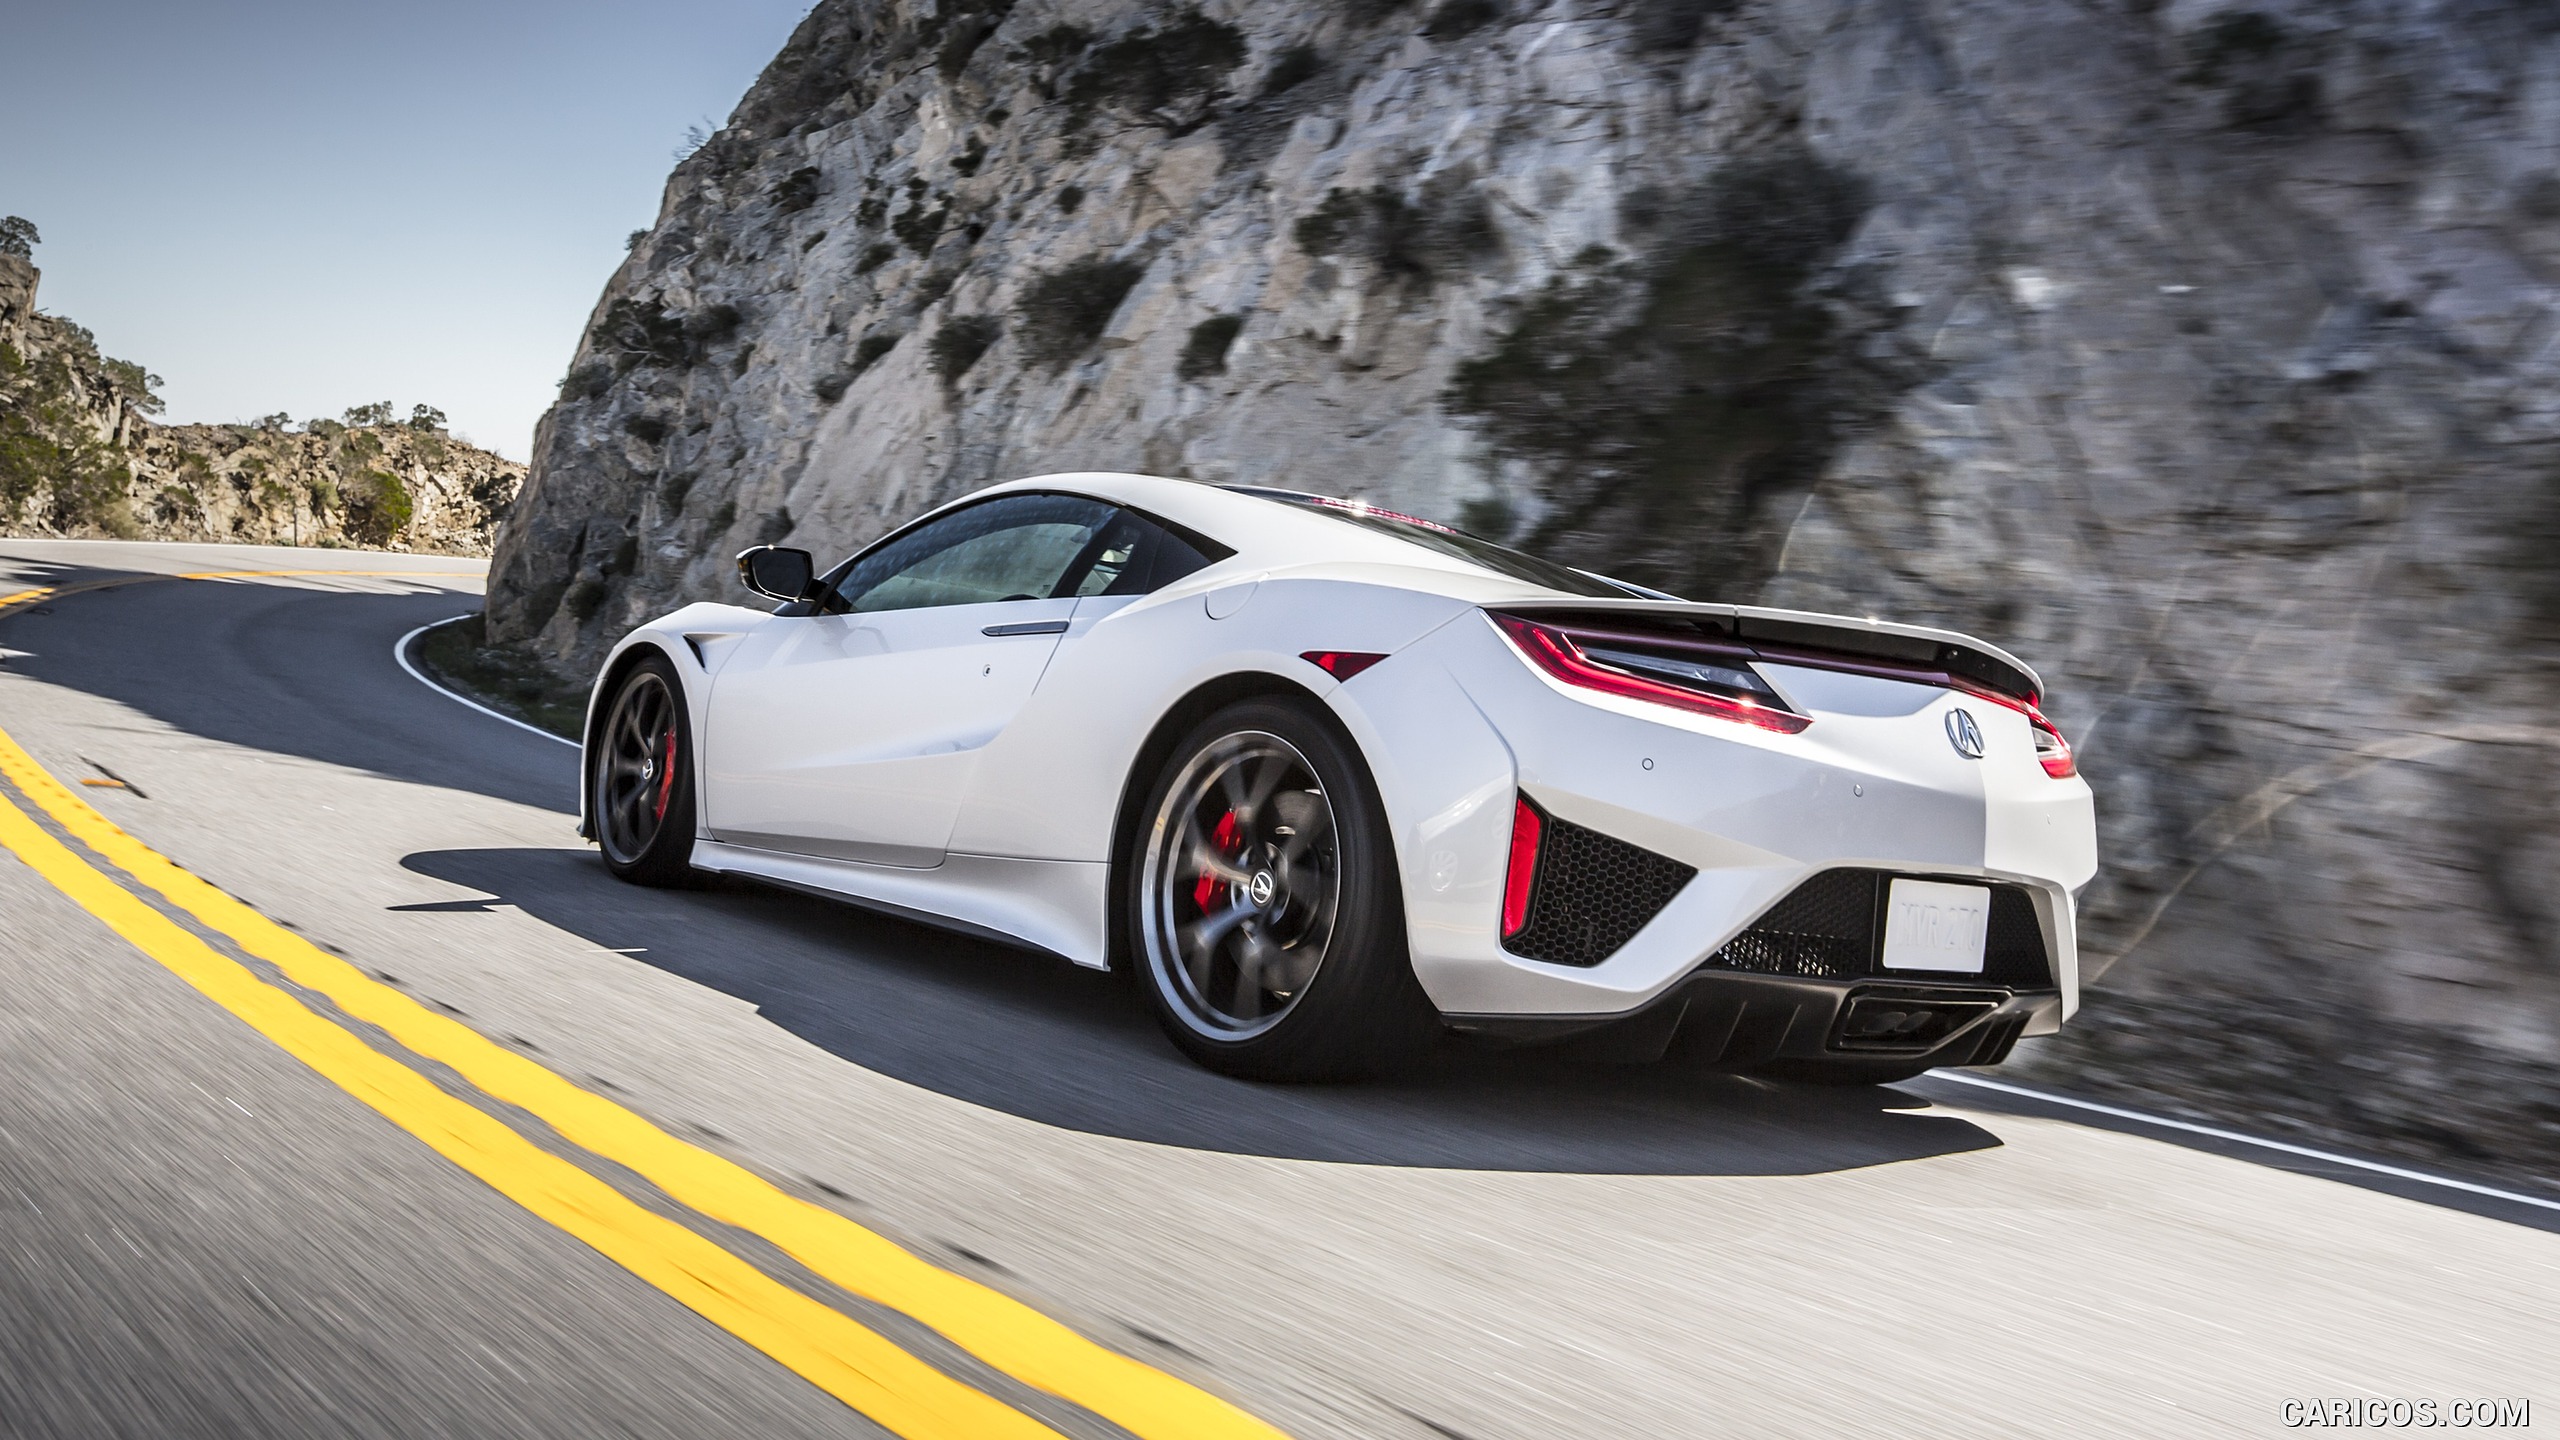 Free Download 2017 Acura Nsx White Rear Hd Wallpaper 2 2560x1440 For Your Desktop Mobile Tablet Explore 29 2017 Acura Nsx Wallpapers Acura Nsx 2017 Wallpaper 2017 Acura Nsx Wallpapers Acura Nsx Wallpapers